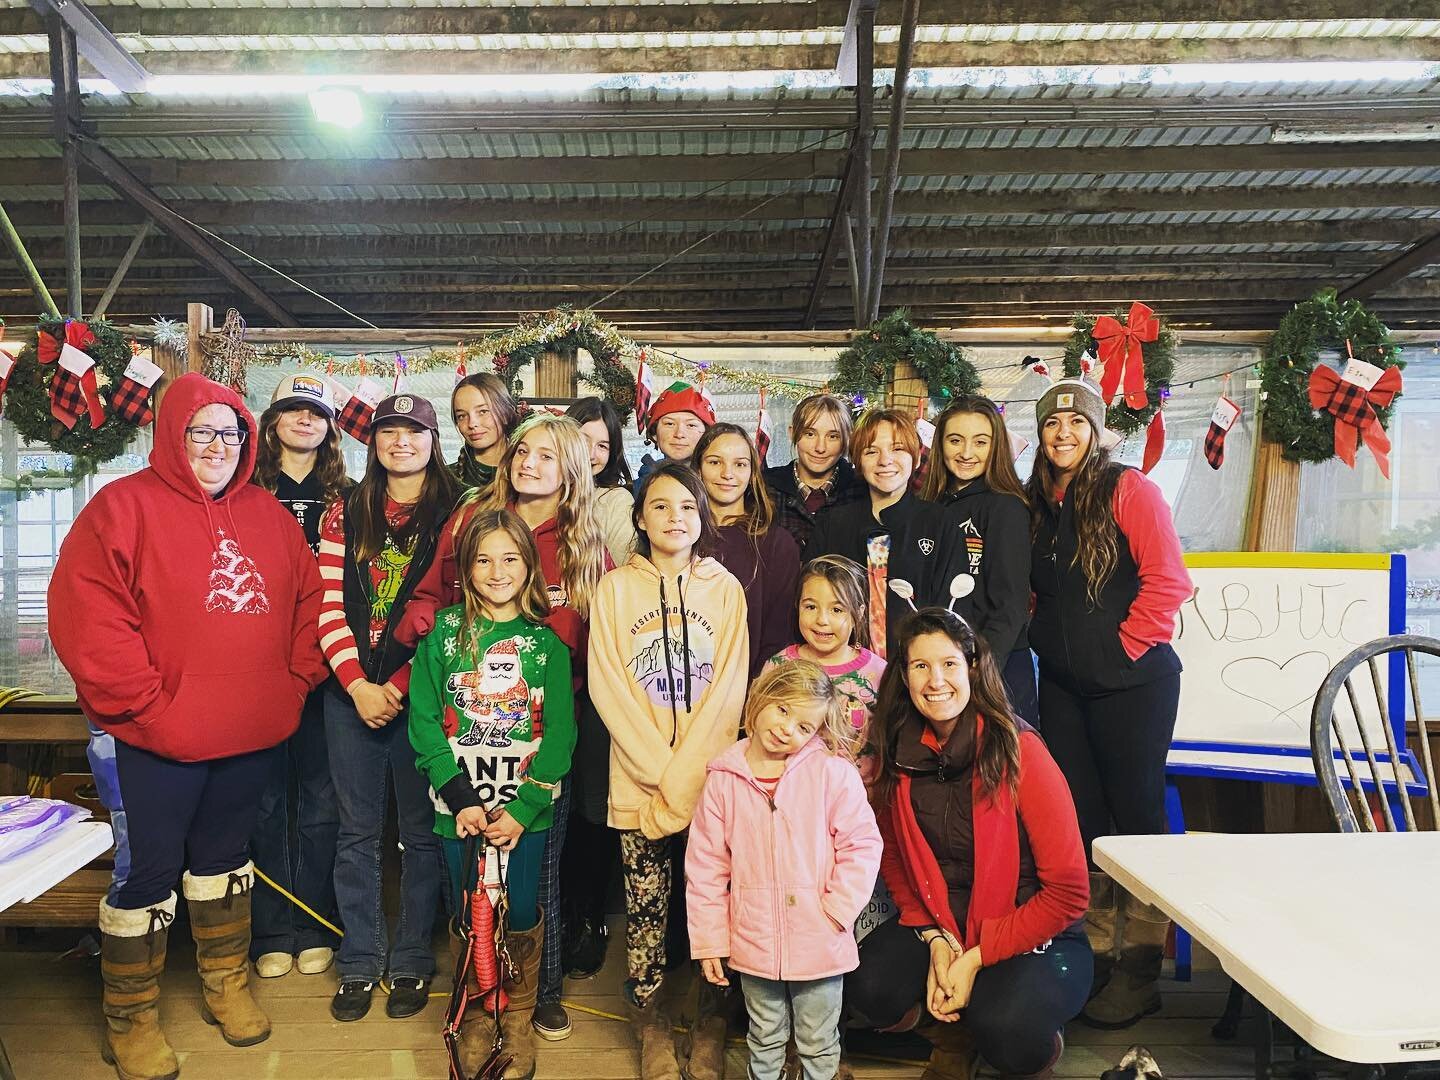 Holiday party 2021 at MBHTC! So much fun between free jumping, ornament making, and white elephant. We are so thankful to have such an amazing team and can&rsquo;t wait for all the fun to come in the new year! 🎄🎅🏻🎄